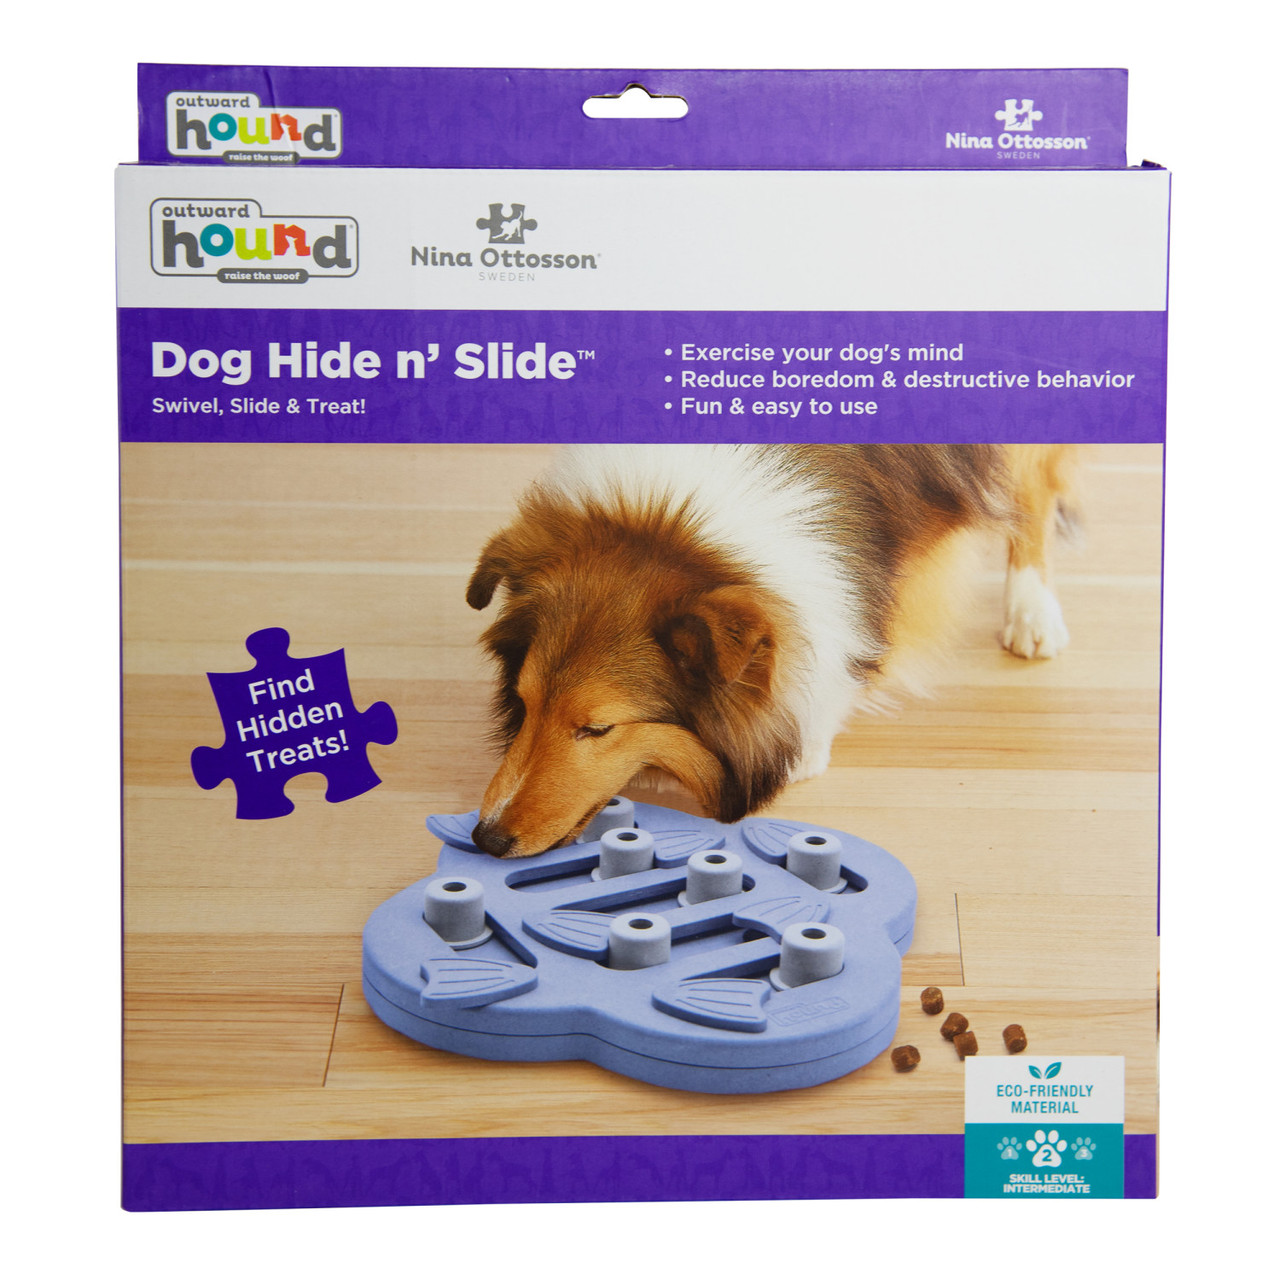 Outward Hound Twister Interactive Treat Puzzle Dog Toy, Purple, One-Size 